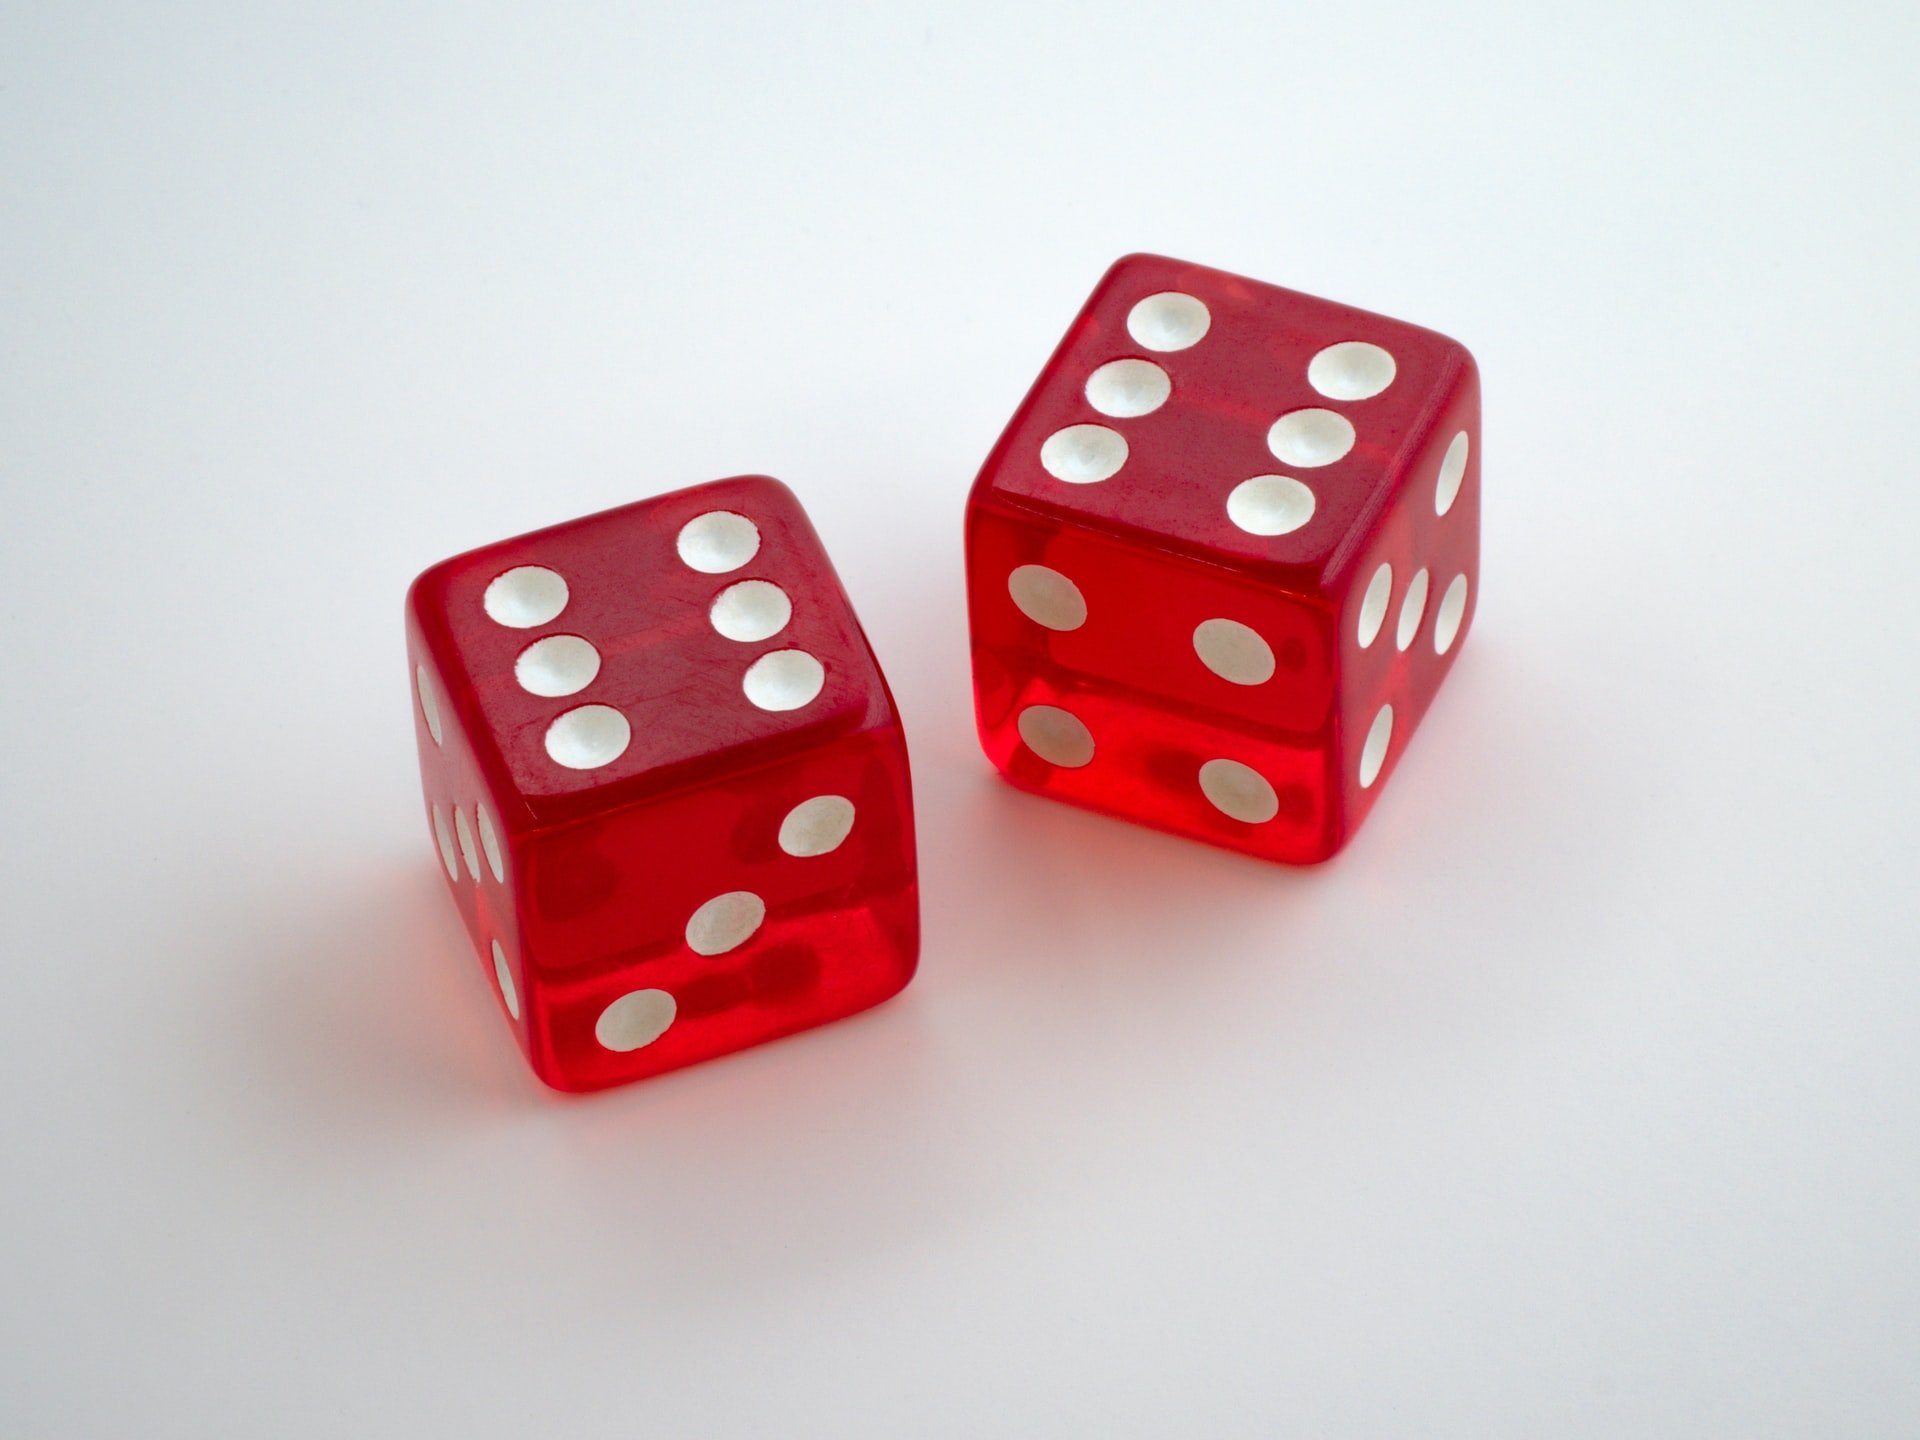 Two red and white dice 